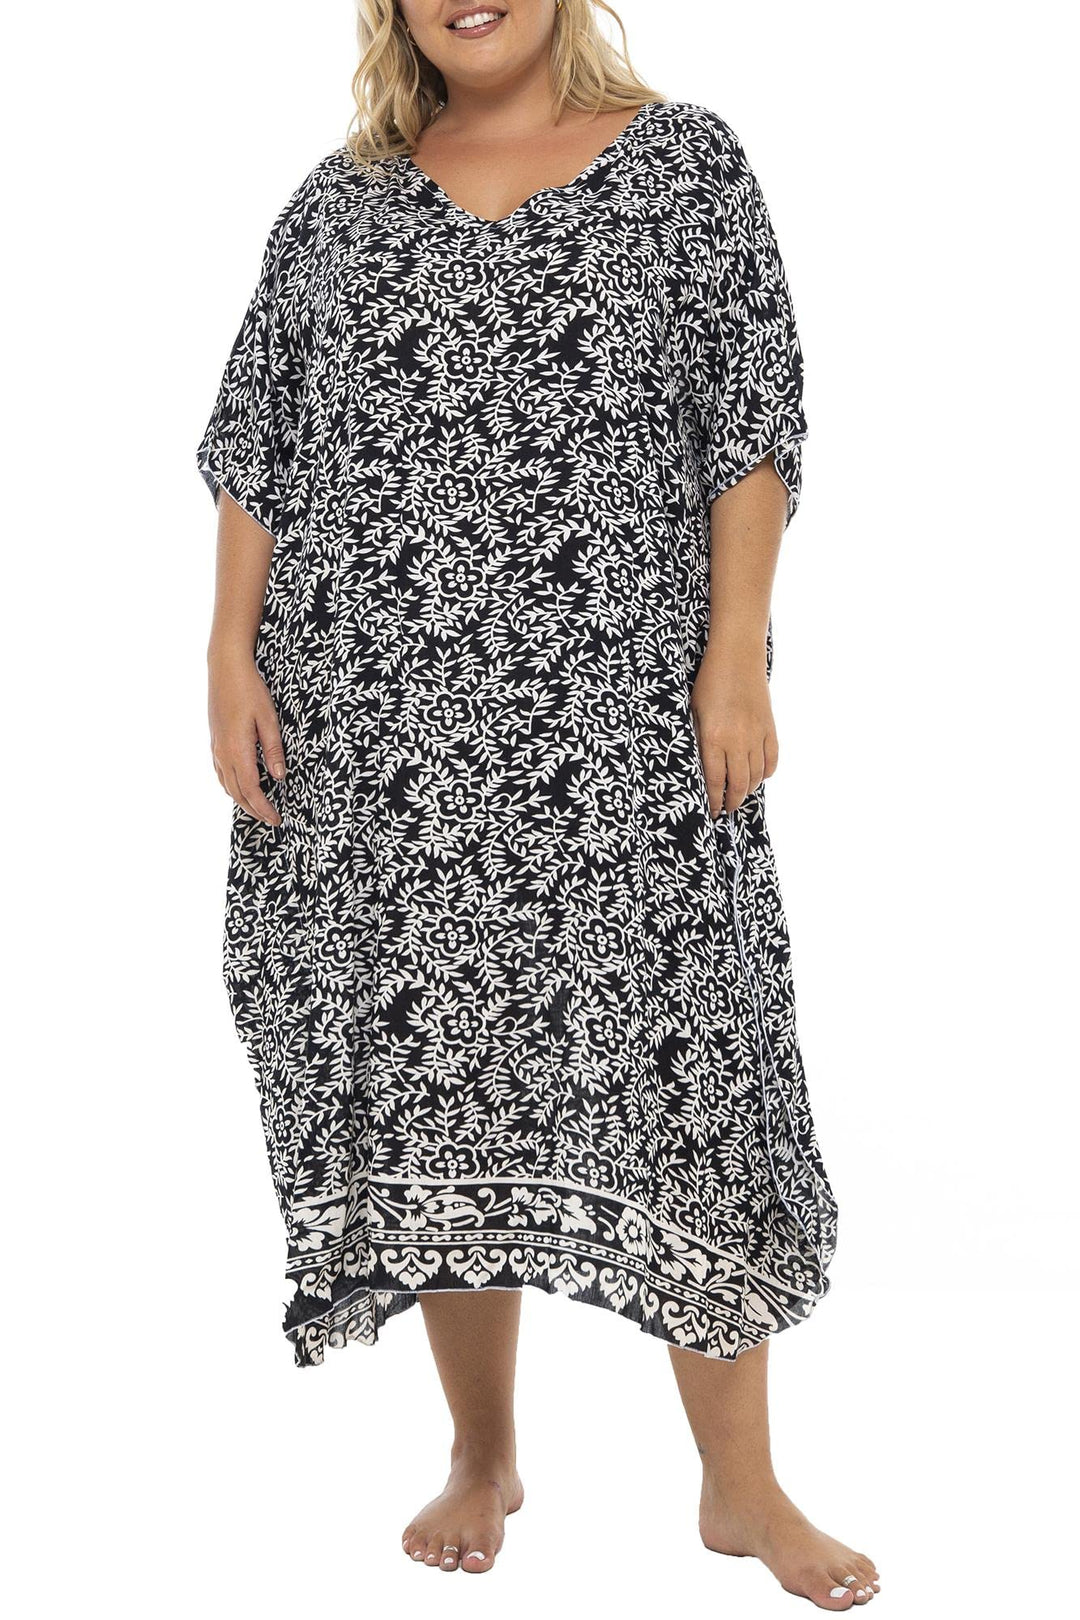 Plus Size Floral Maxi Flowy Tunic Cover Up